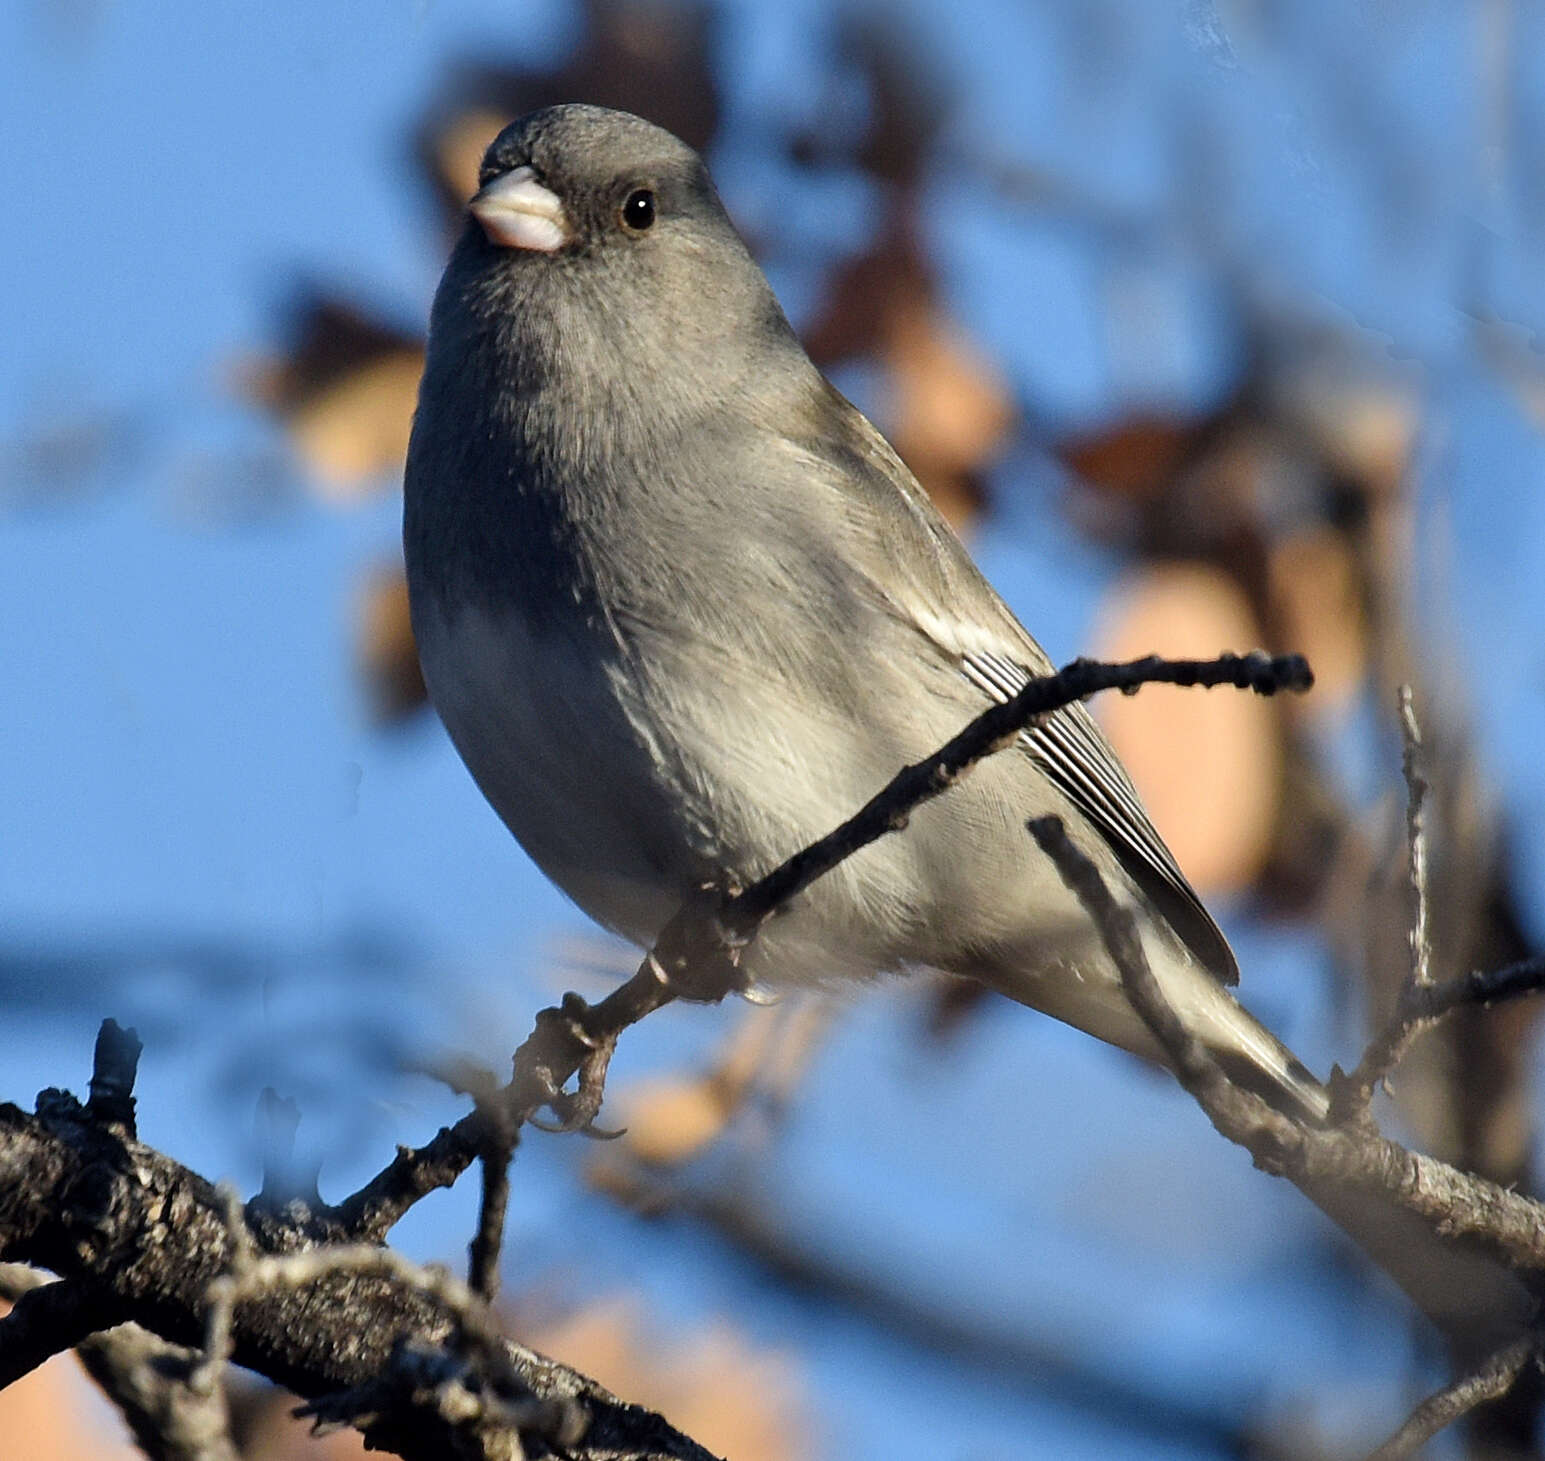 Image of White-winged Junco